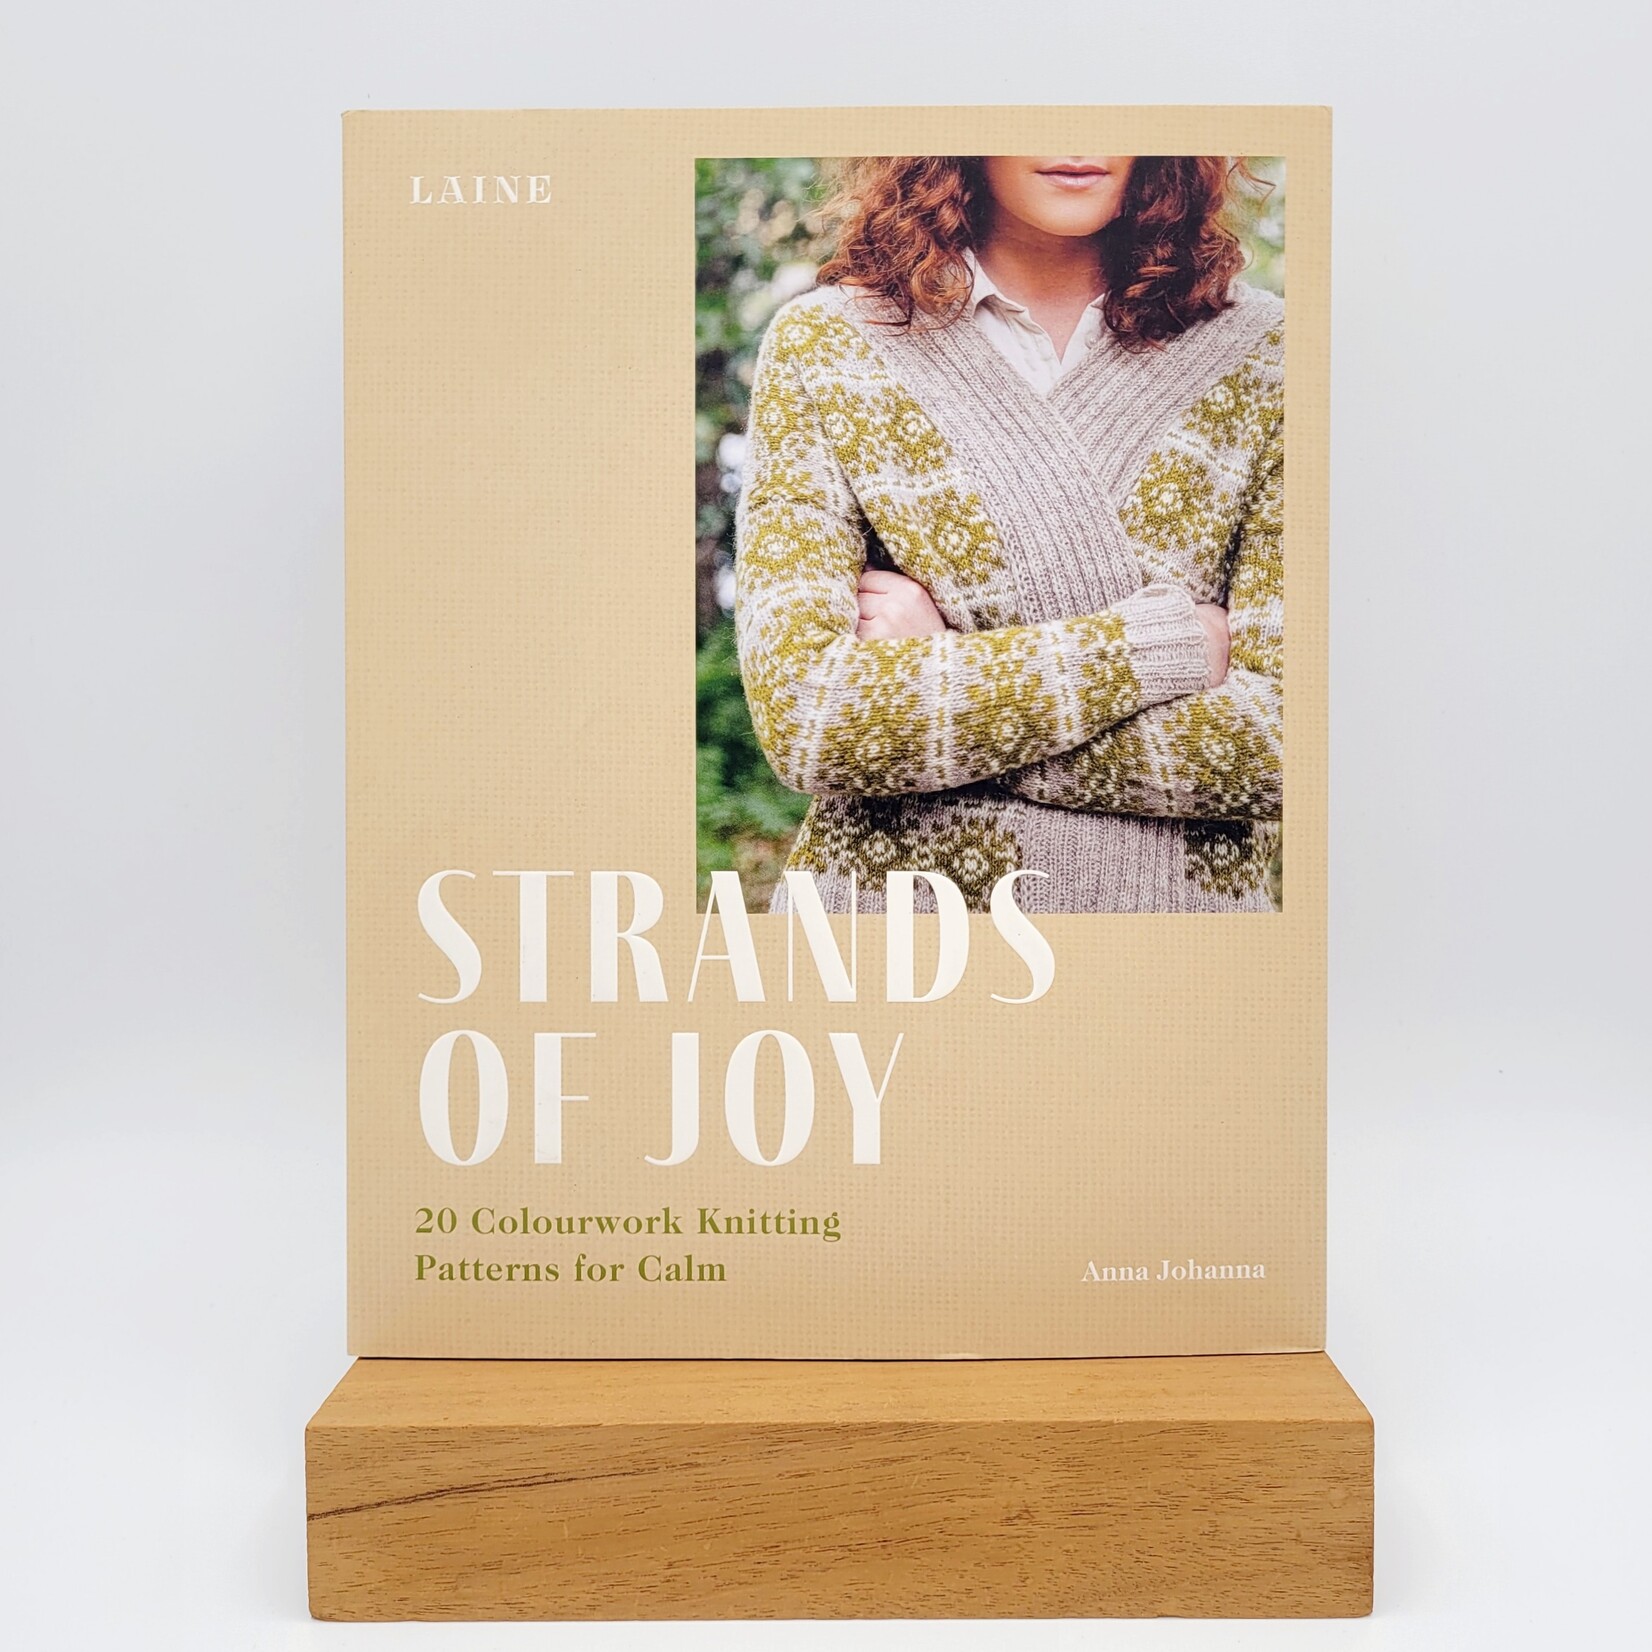 Hardie Grant Books Strands of Joy - 20 Colourwork Knitting Patterns for Calm by Laine &  Anna Johanna